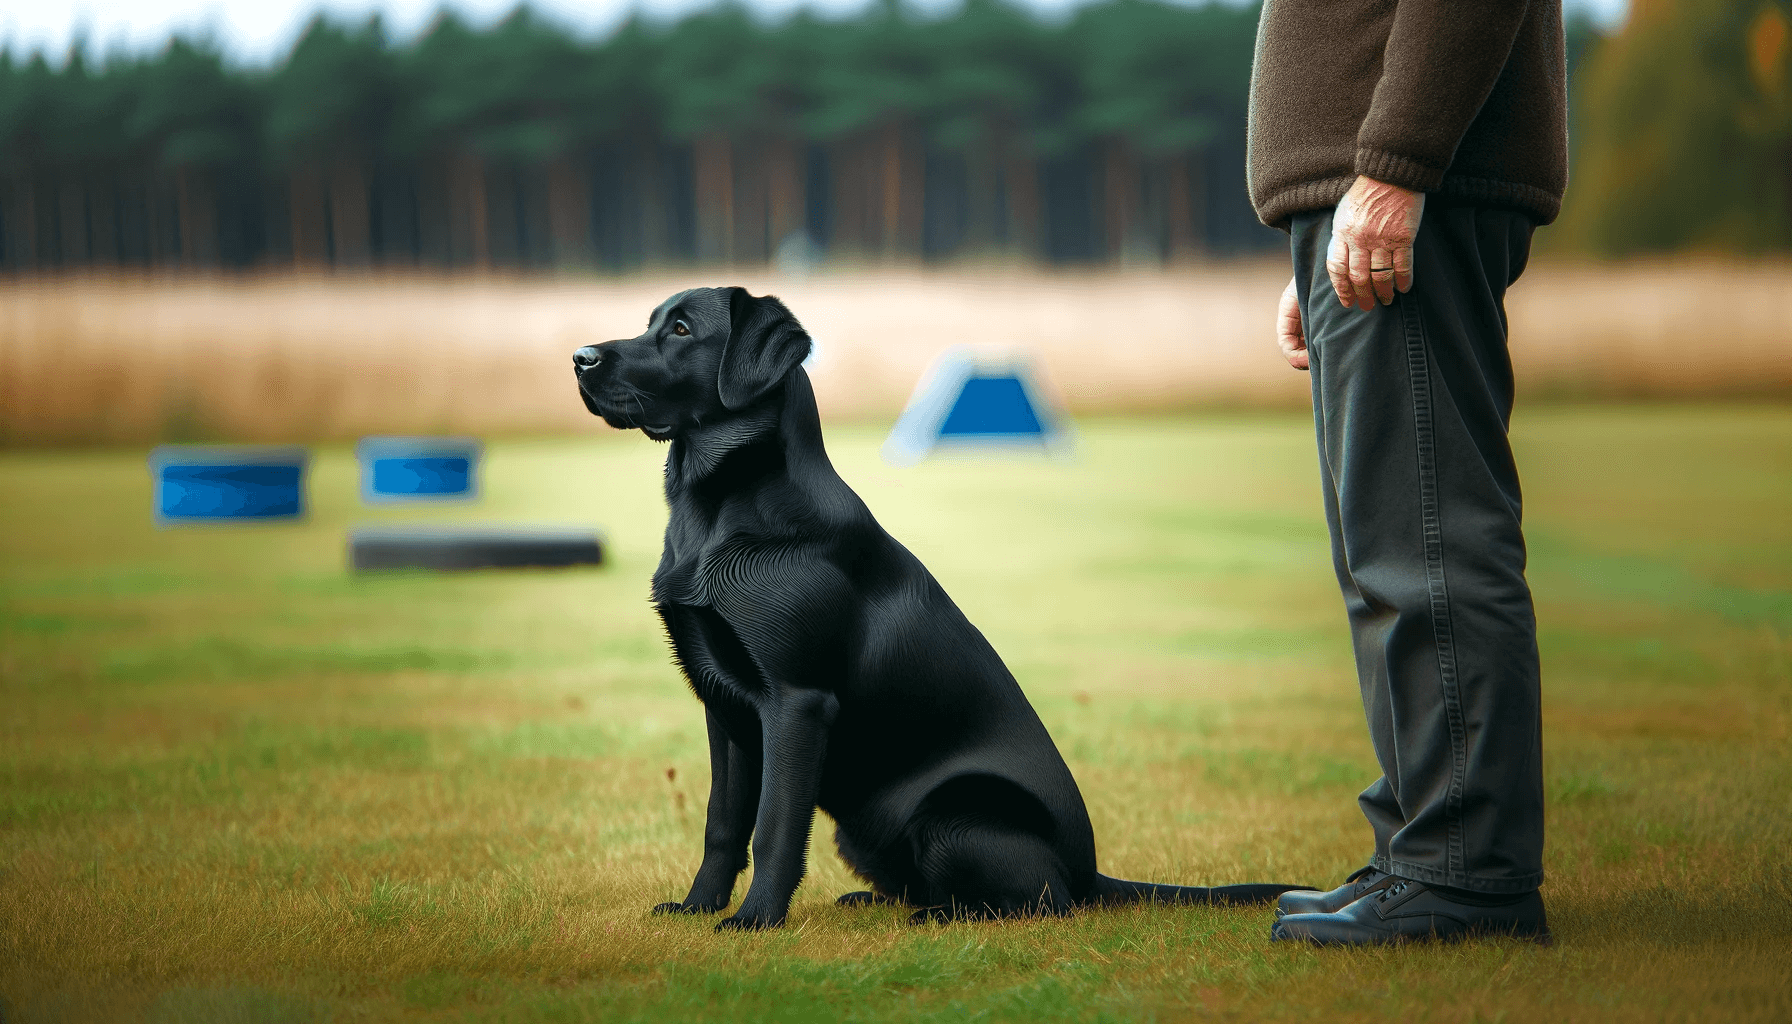 Well-behaved black Labrador Retriever (Labradorii) sitting obediently during an engaging training session. The image shows the Labrador sitting attentively in a training environment.